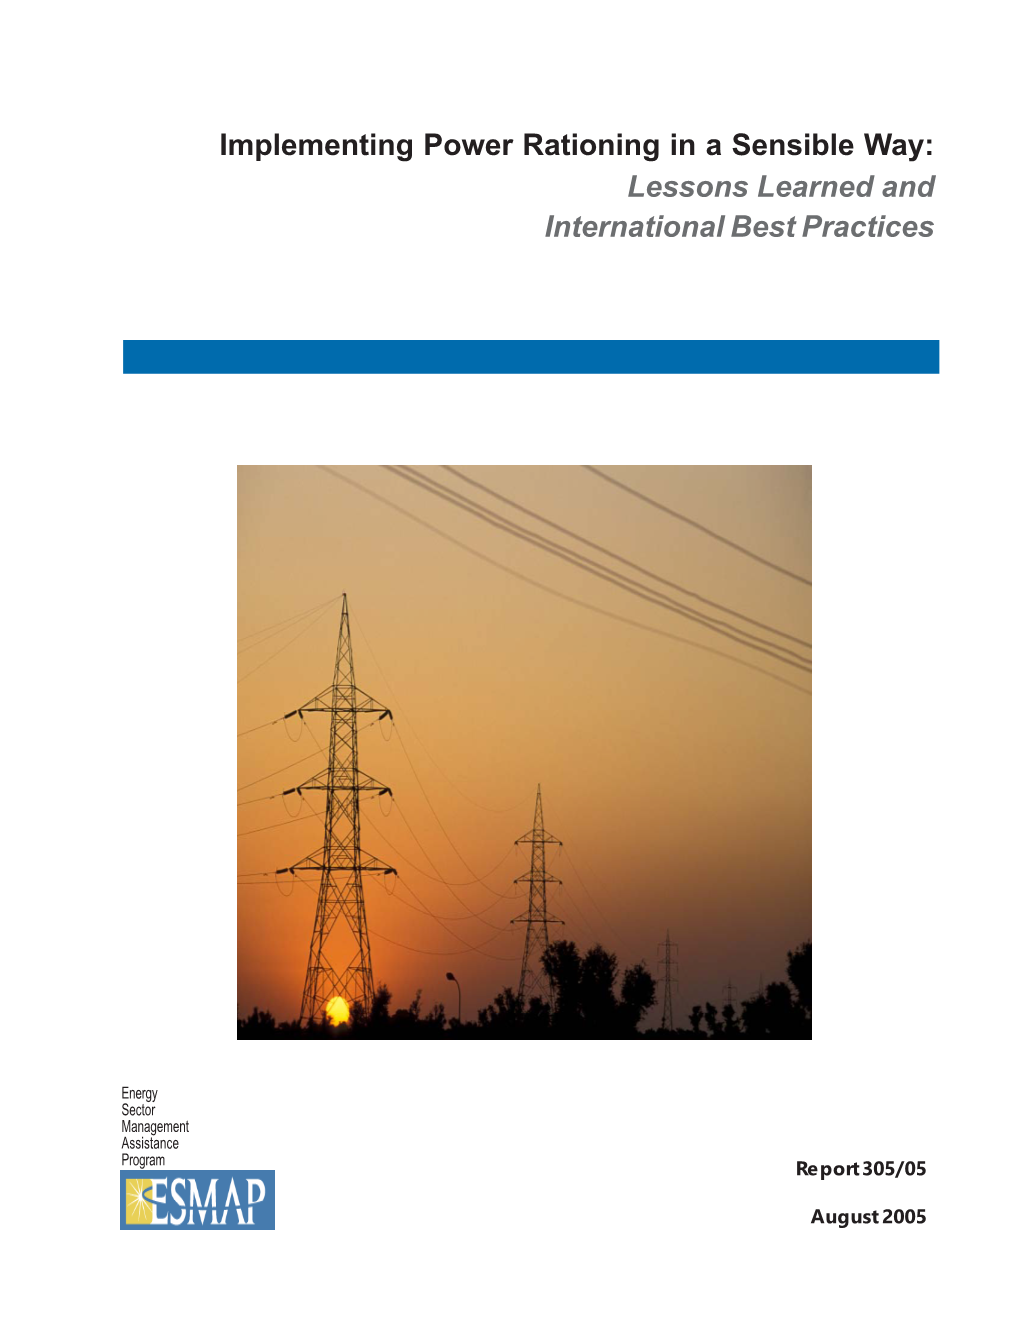 Implementing Power Rationing in a Sensible Way: Lessons Learned and International Best Practices